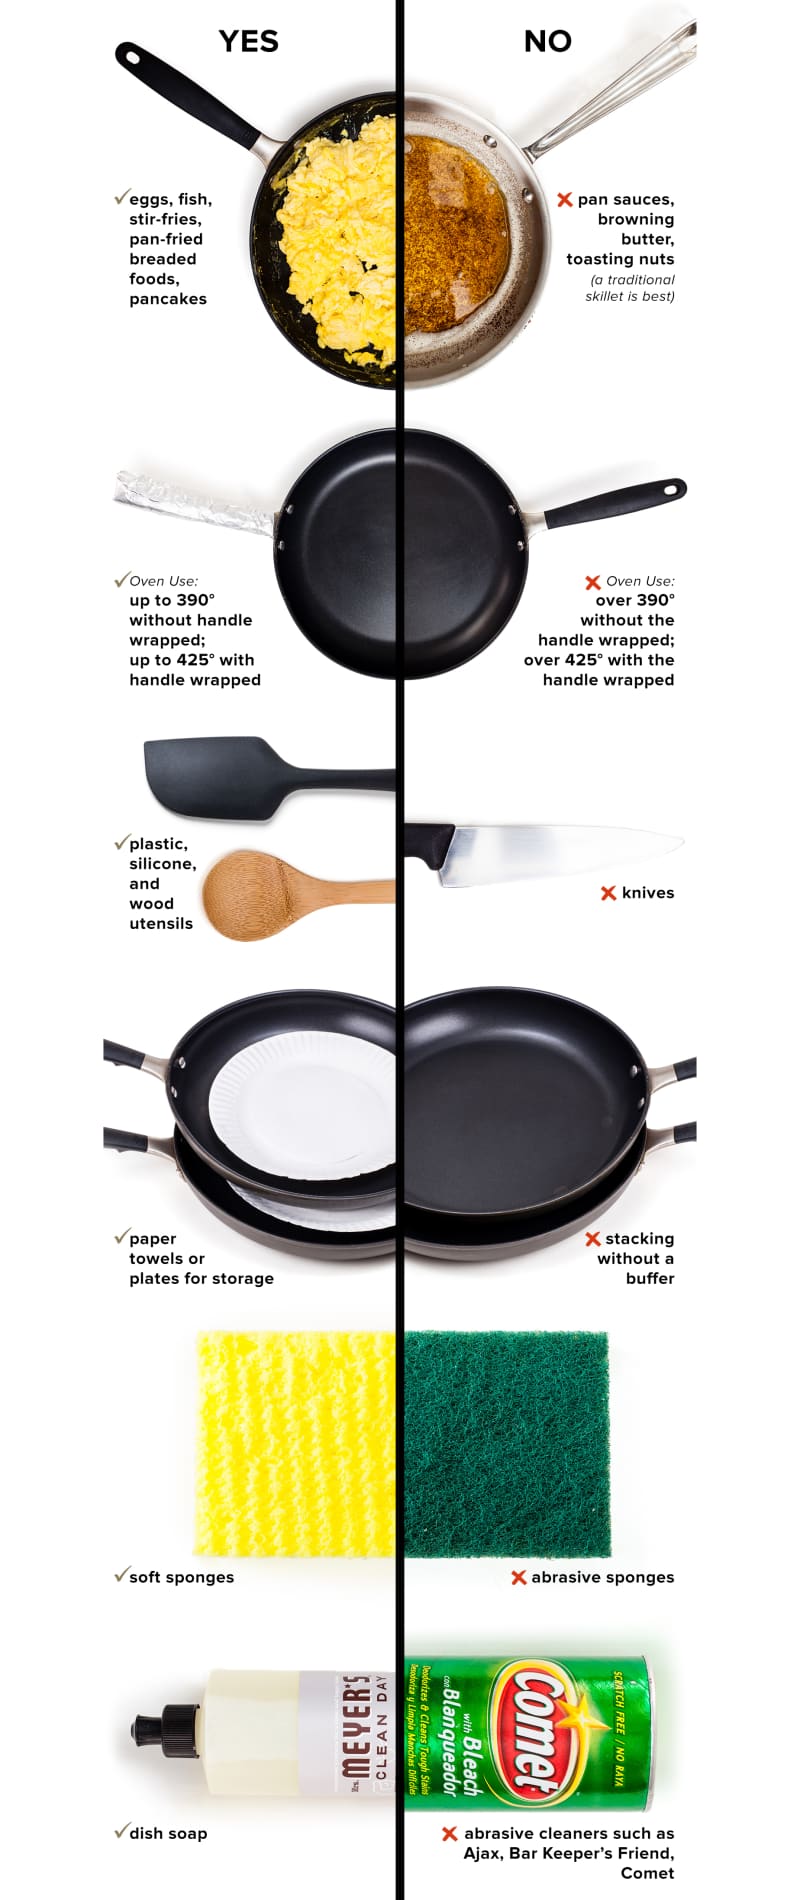 How to Clean Nonstick Cookware & Bakeware